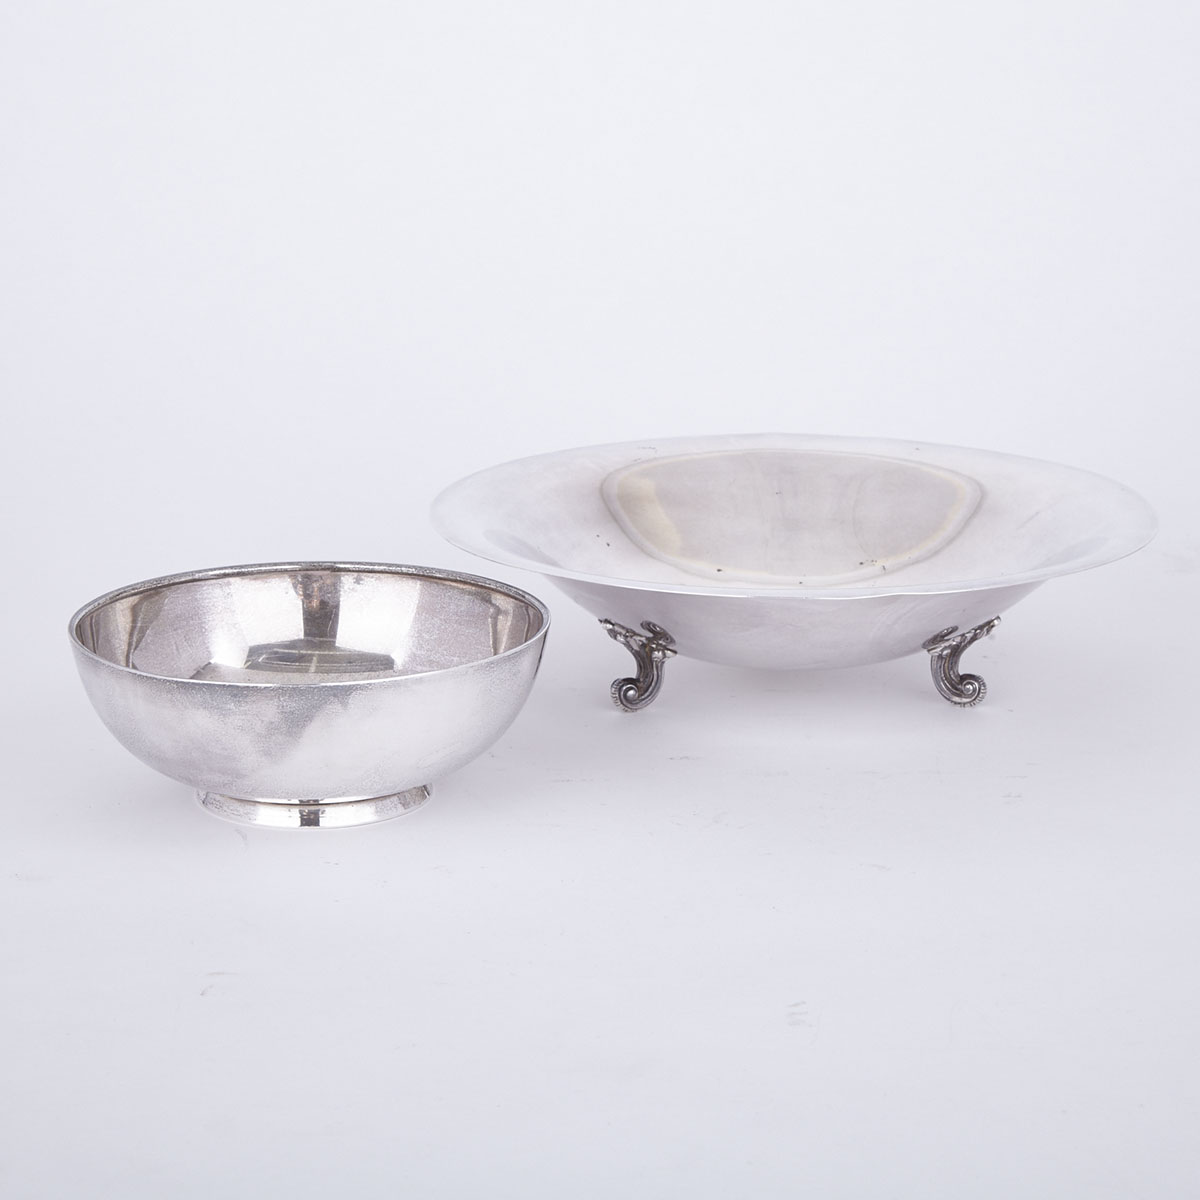 Two American Silver Bowls, Fisher Silversmiths Inc., New York, N.Y. and Webster Co., North Attleboro, Mass., 20th century